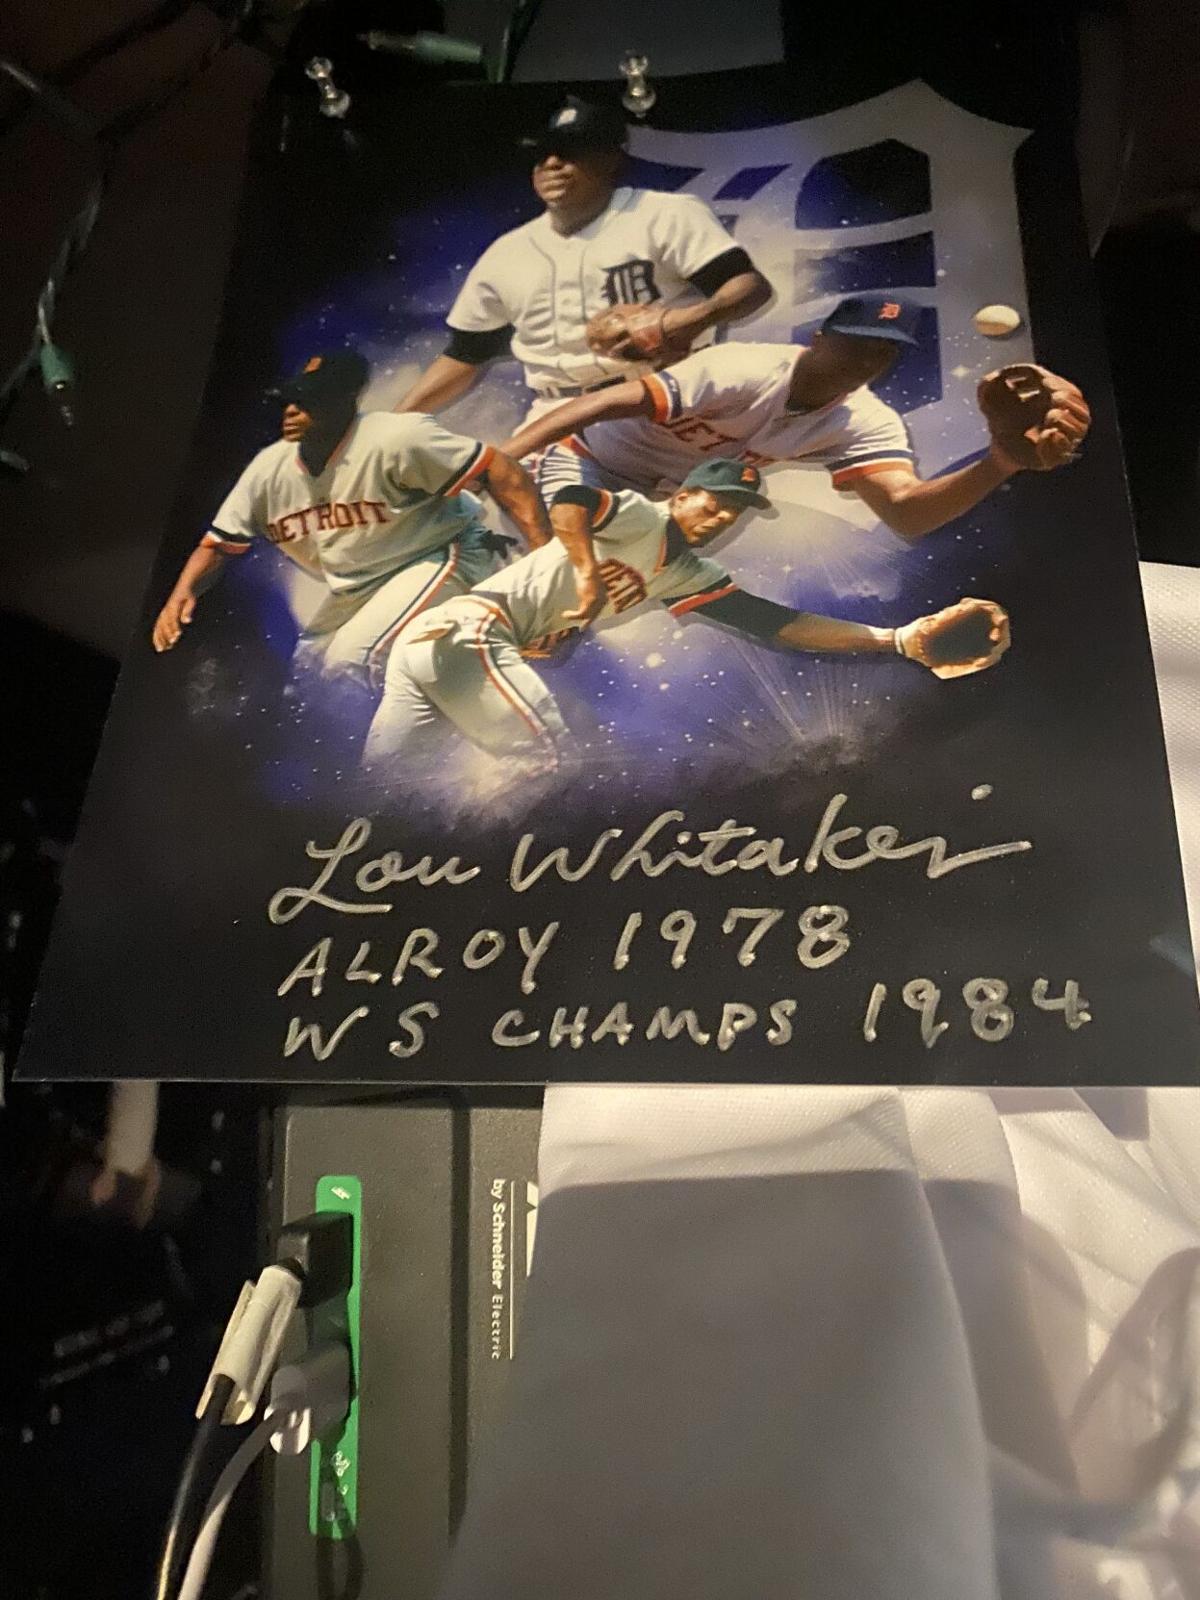 He's getting what he deserved': Lou Whitaker's family, fans head to Detroit  for special weekend